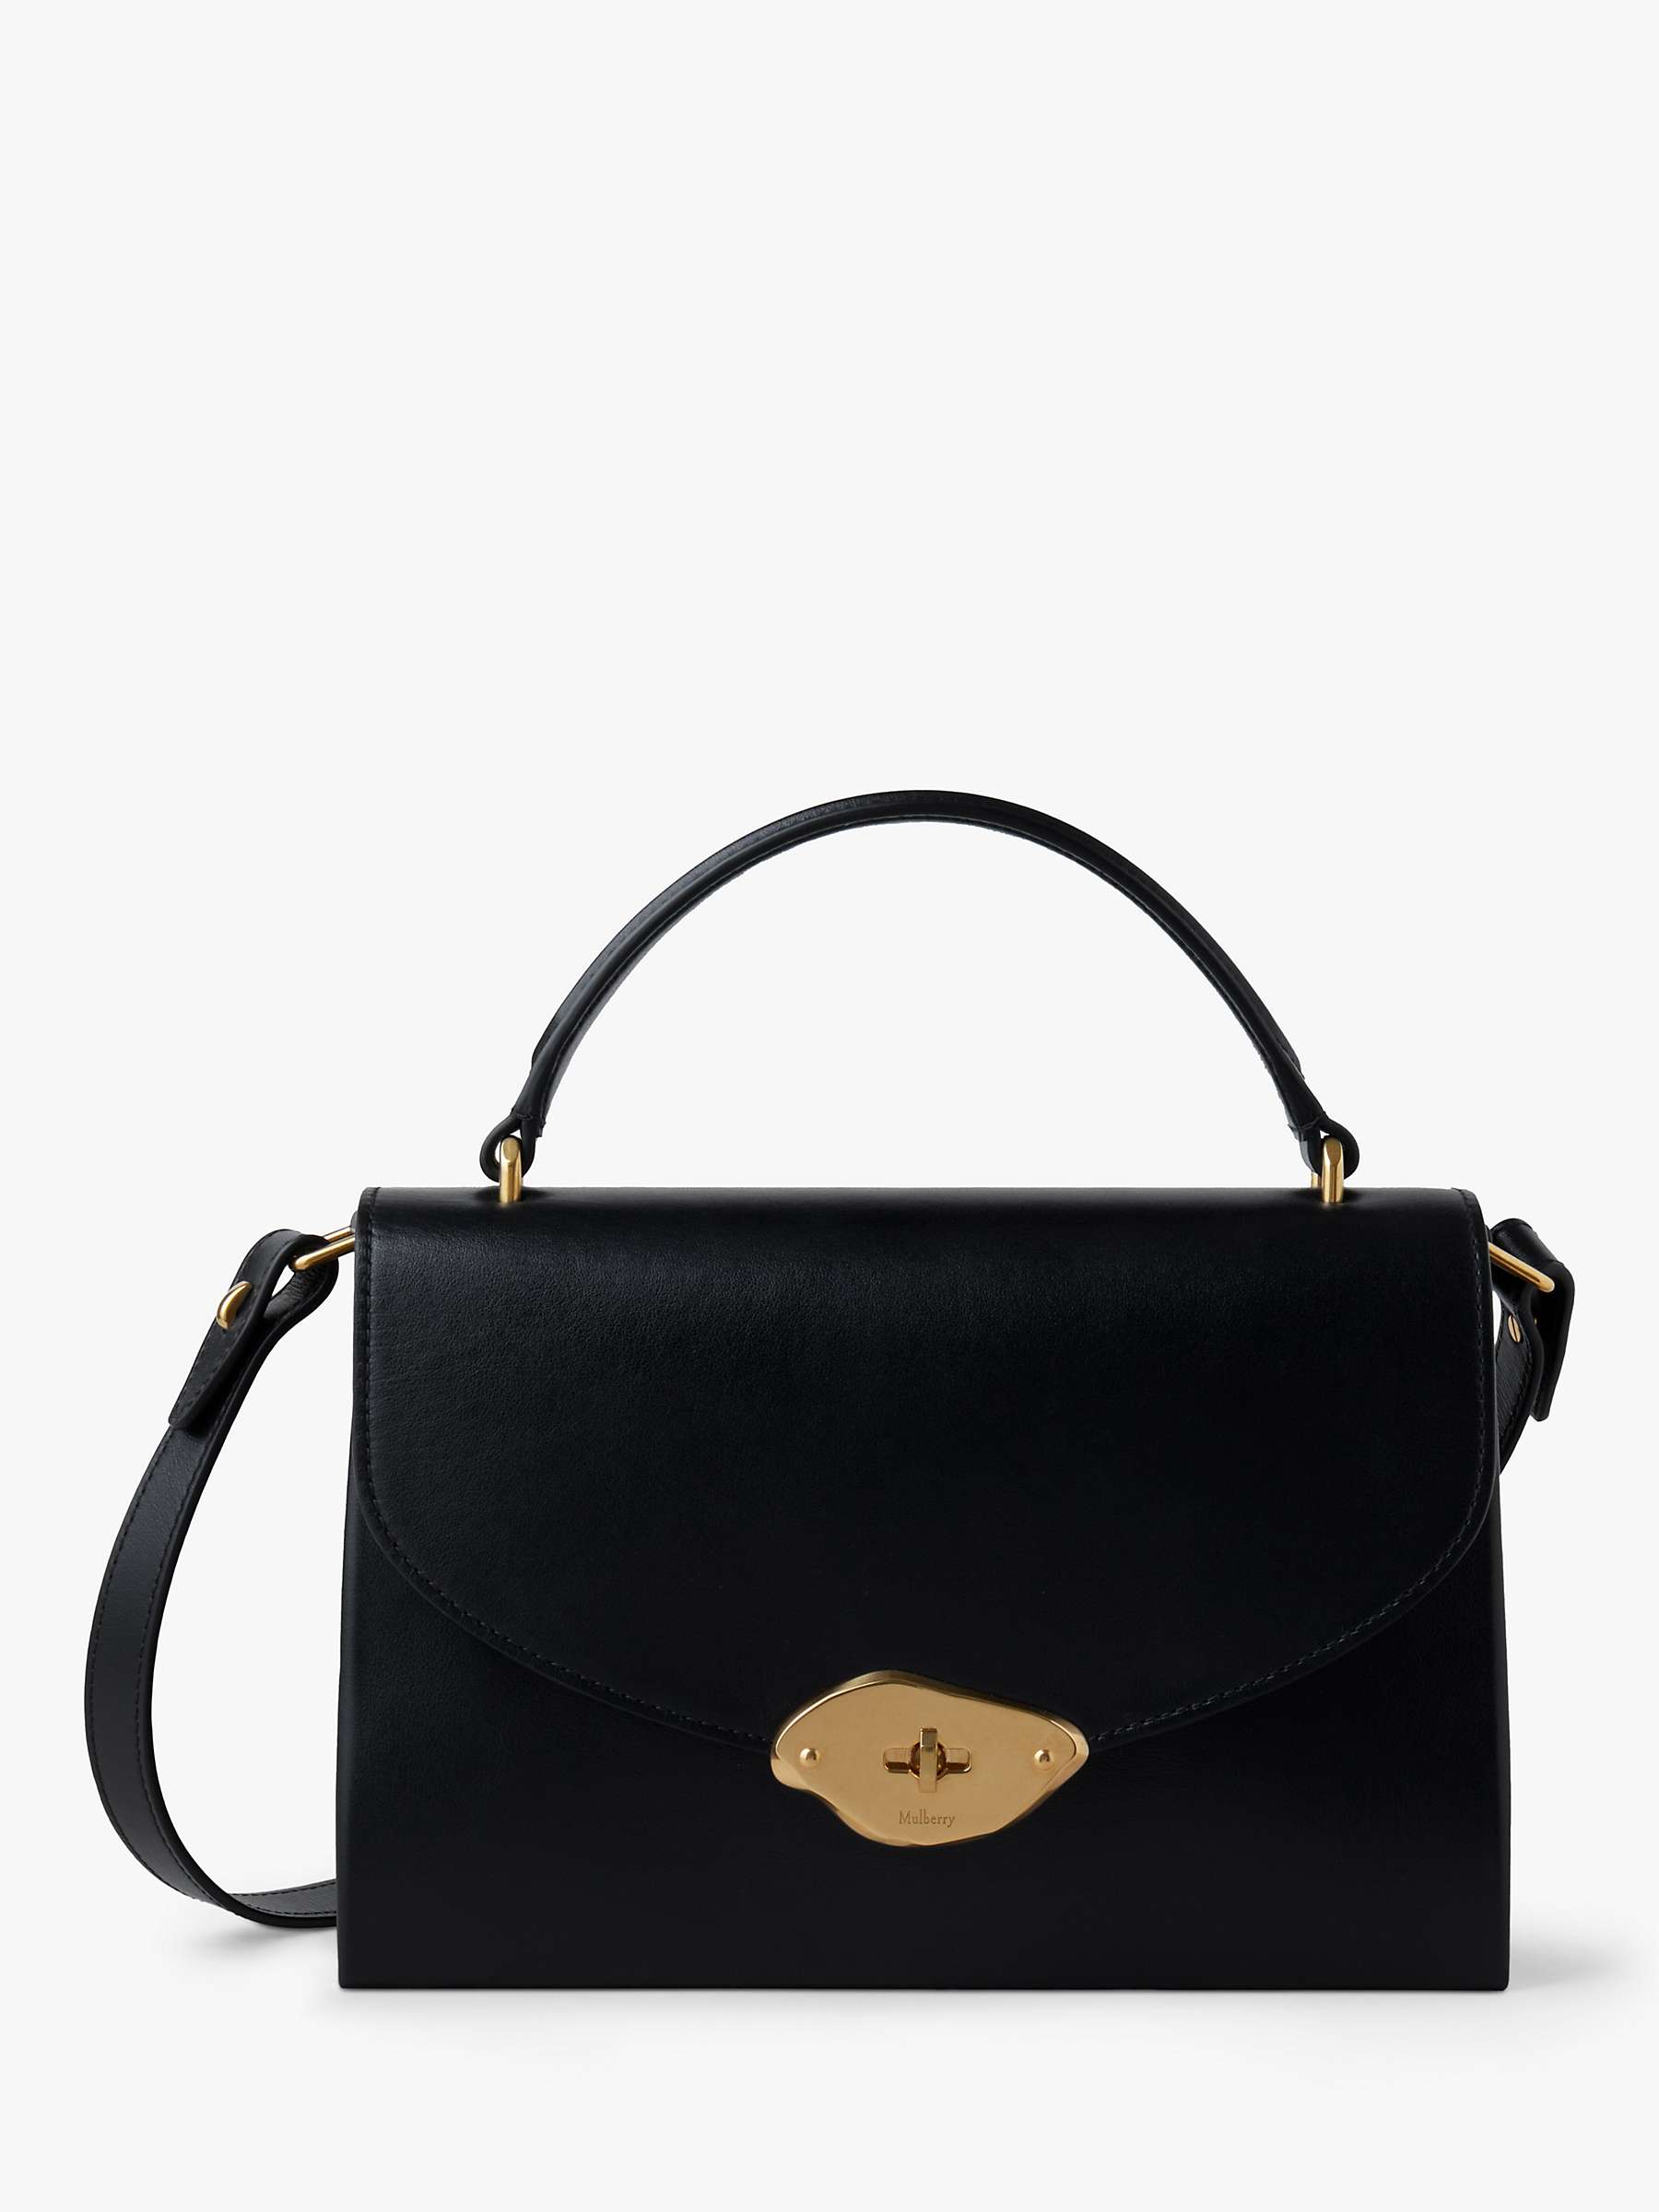 Buy Mulberry Lana High Gloss Leather Top Handle Bag, Black Online at johnlewis.com